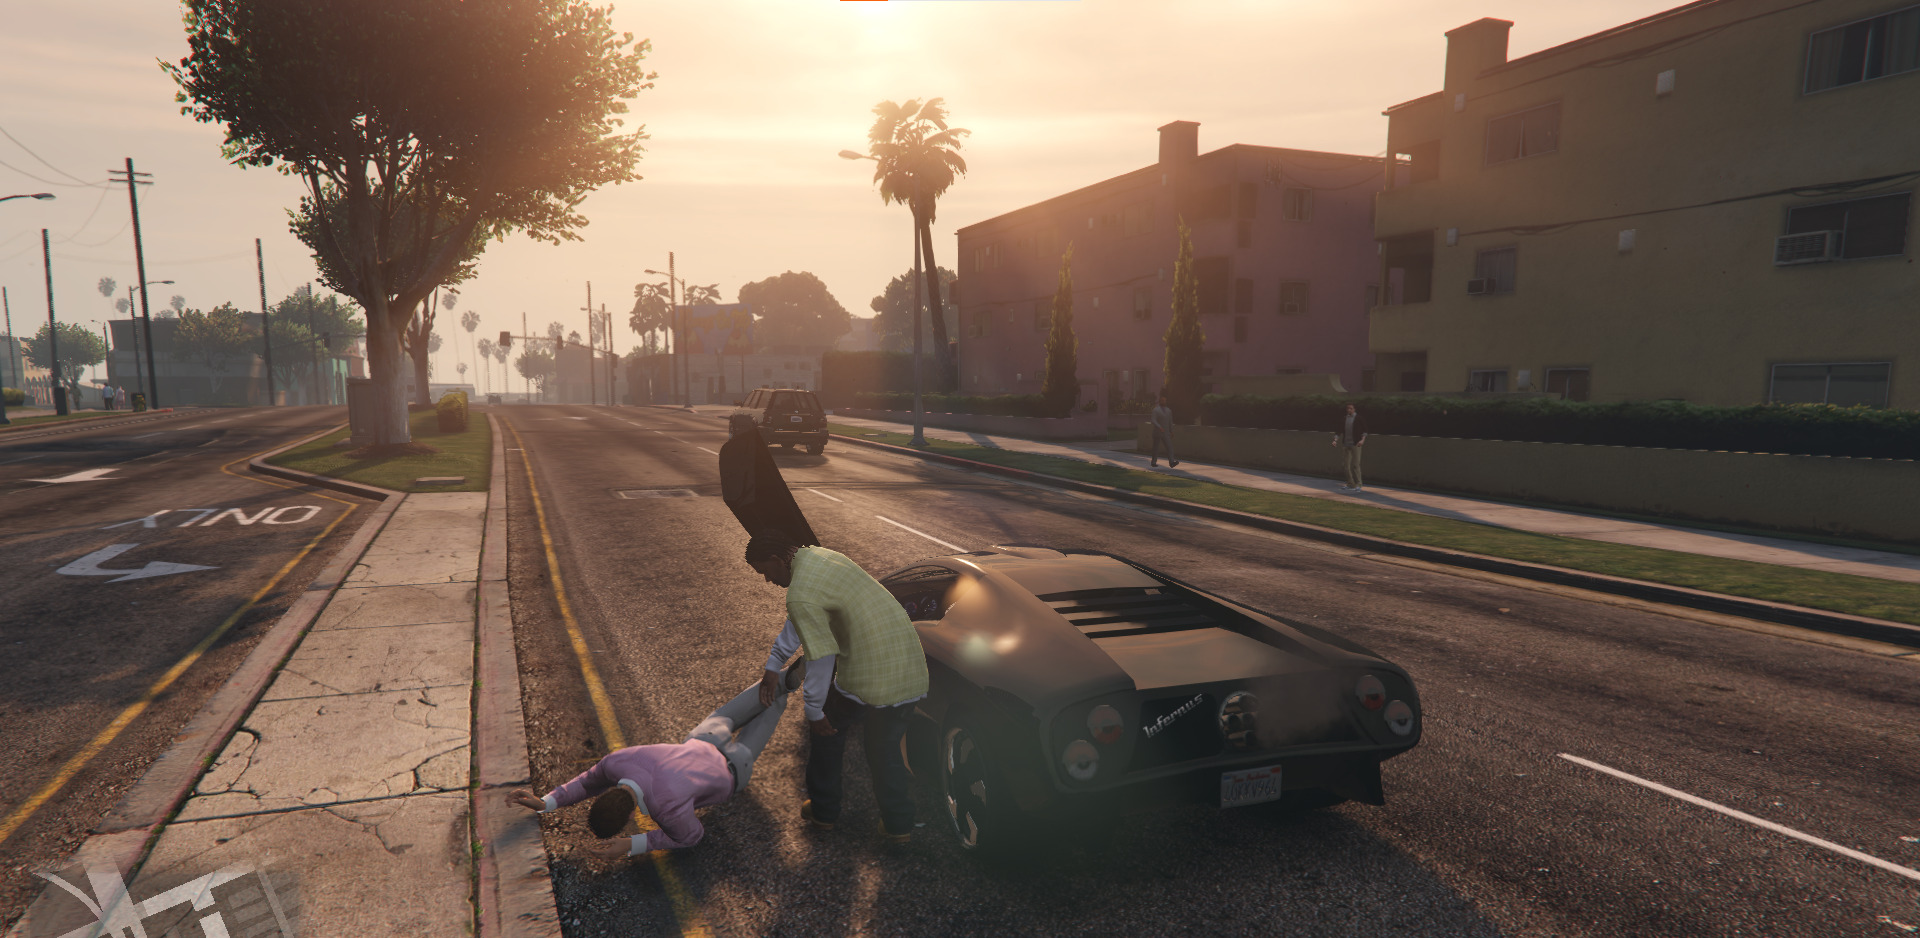 A screenshot showing Michael throwing someone out of a car in GTA 5